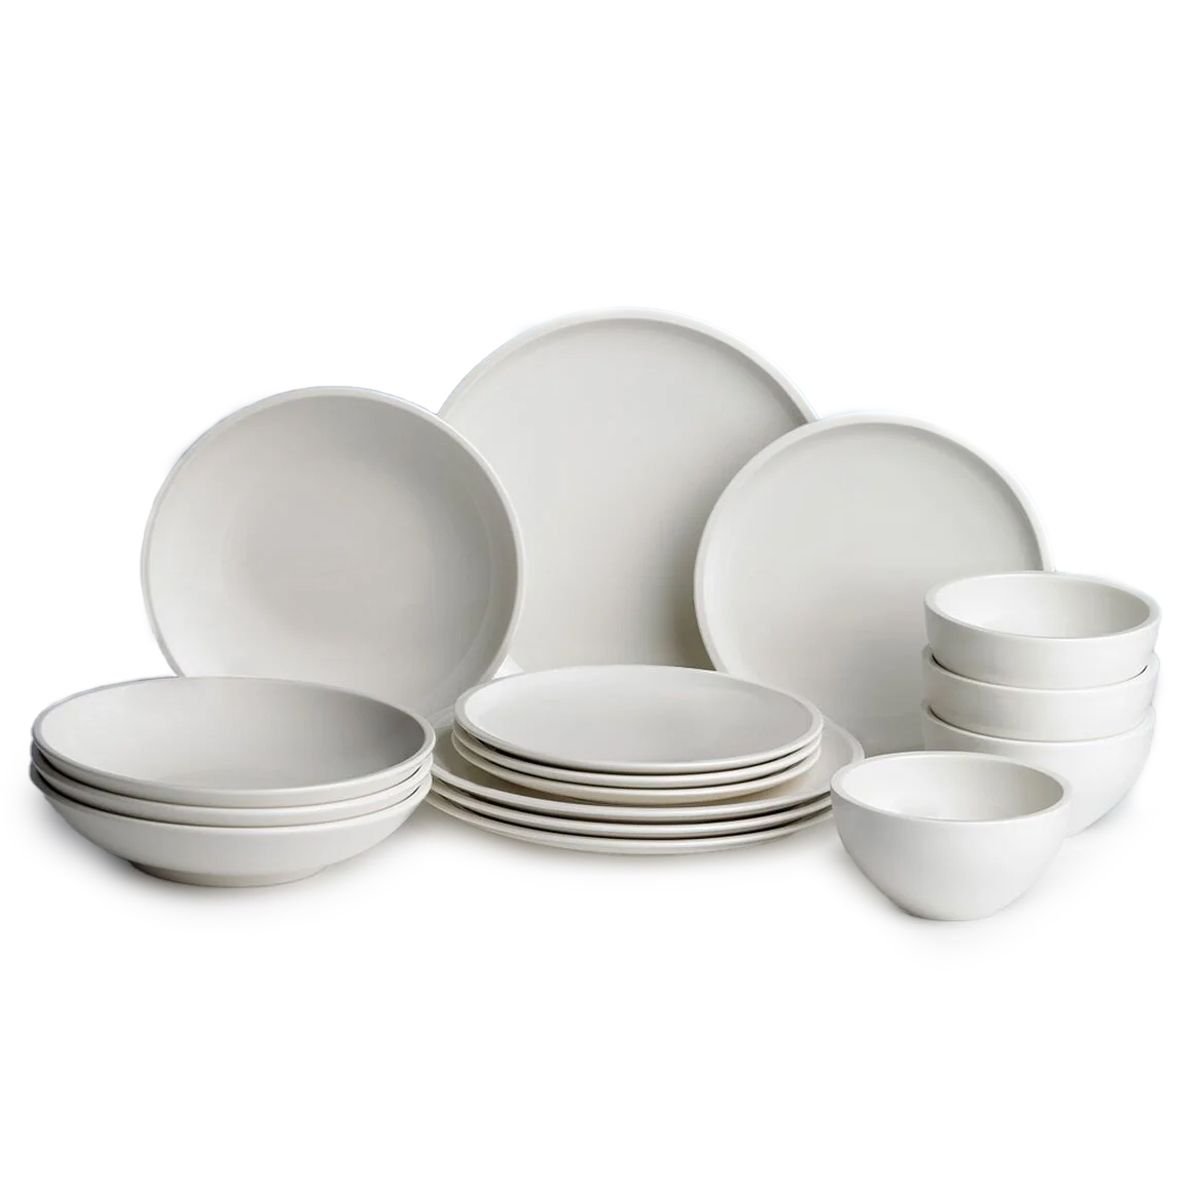 Villeroy & Boch French Garden 12-Piece Dinnerware Set, Service for 4,  Plates, Bowls & Mugs, Premium Porcelain, Made in Germany